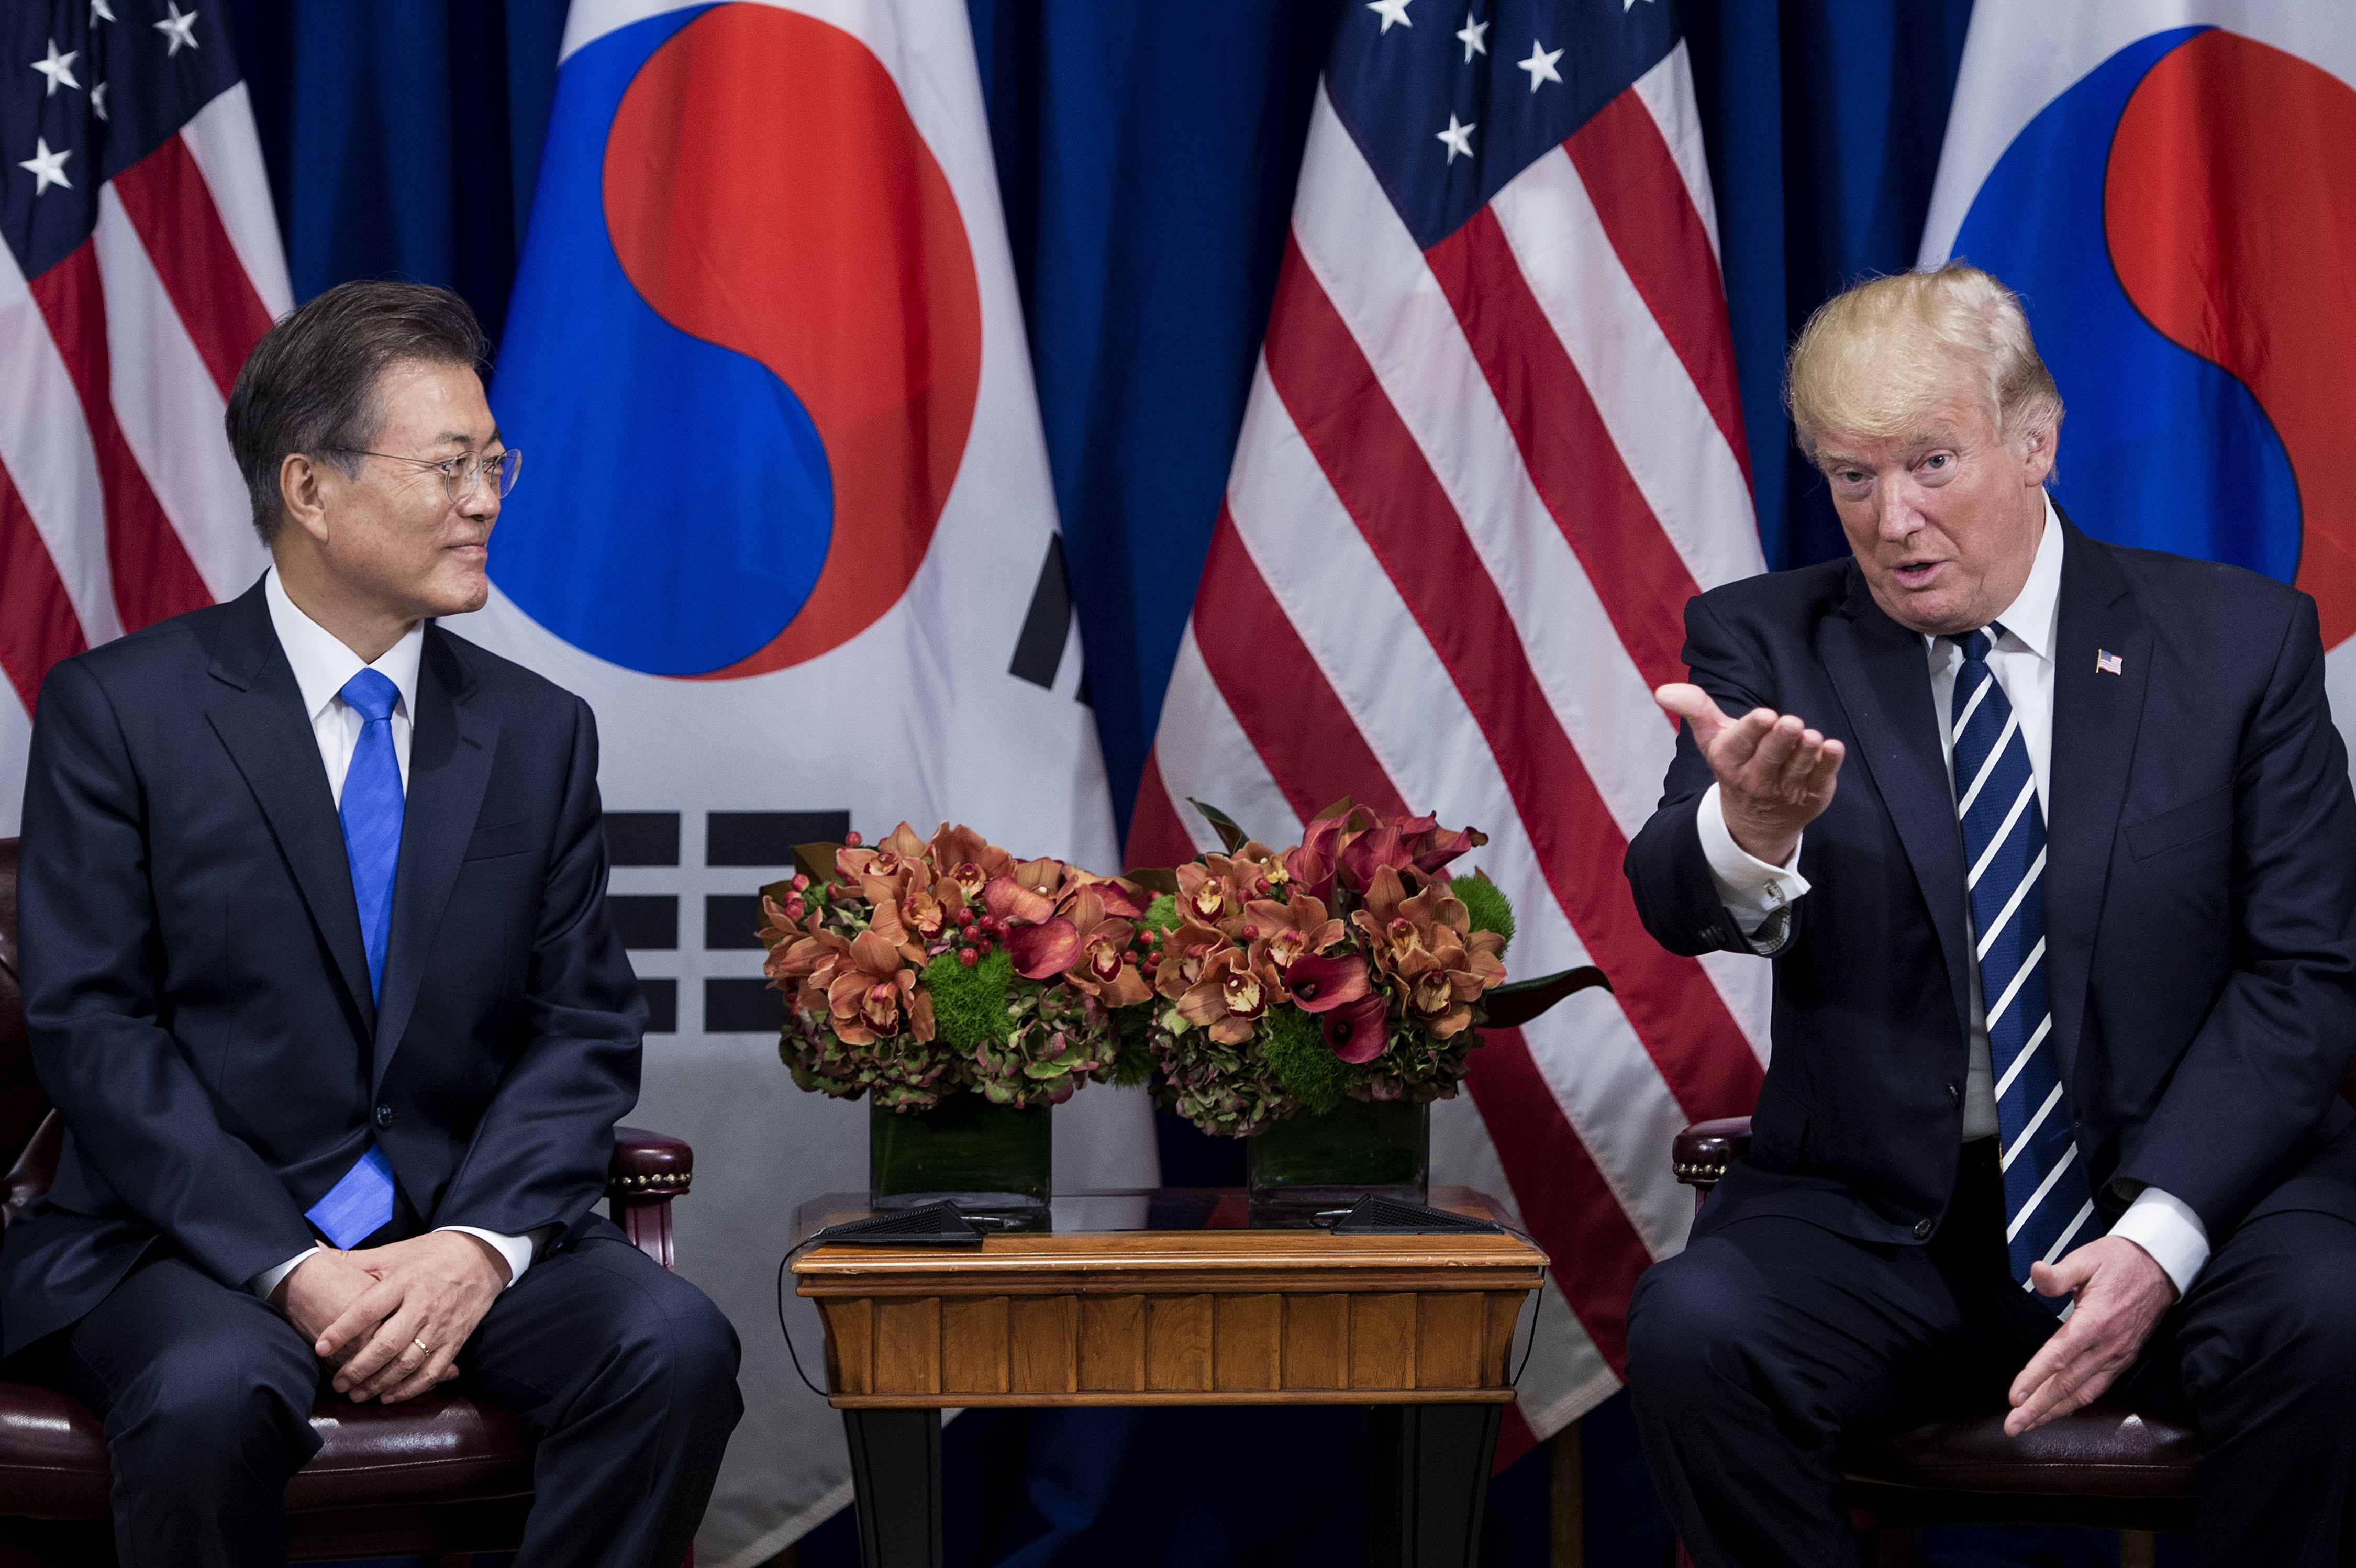 Donald Trump’s trip marks the first visit to Seoul by a foreign head of state since Moon Jae-in took office in May. Photo: AFP